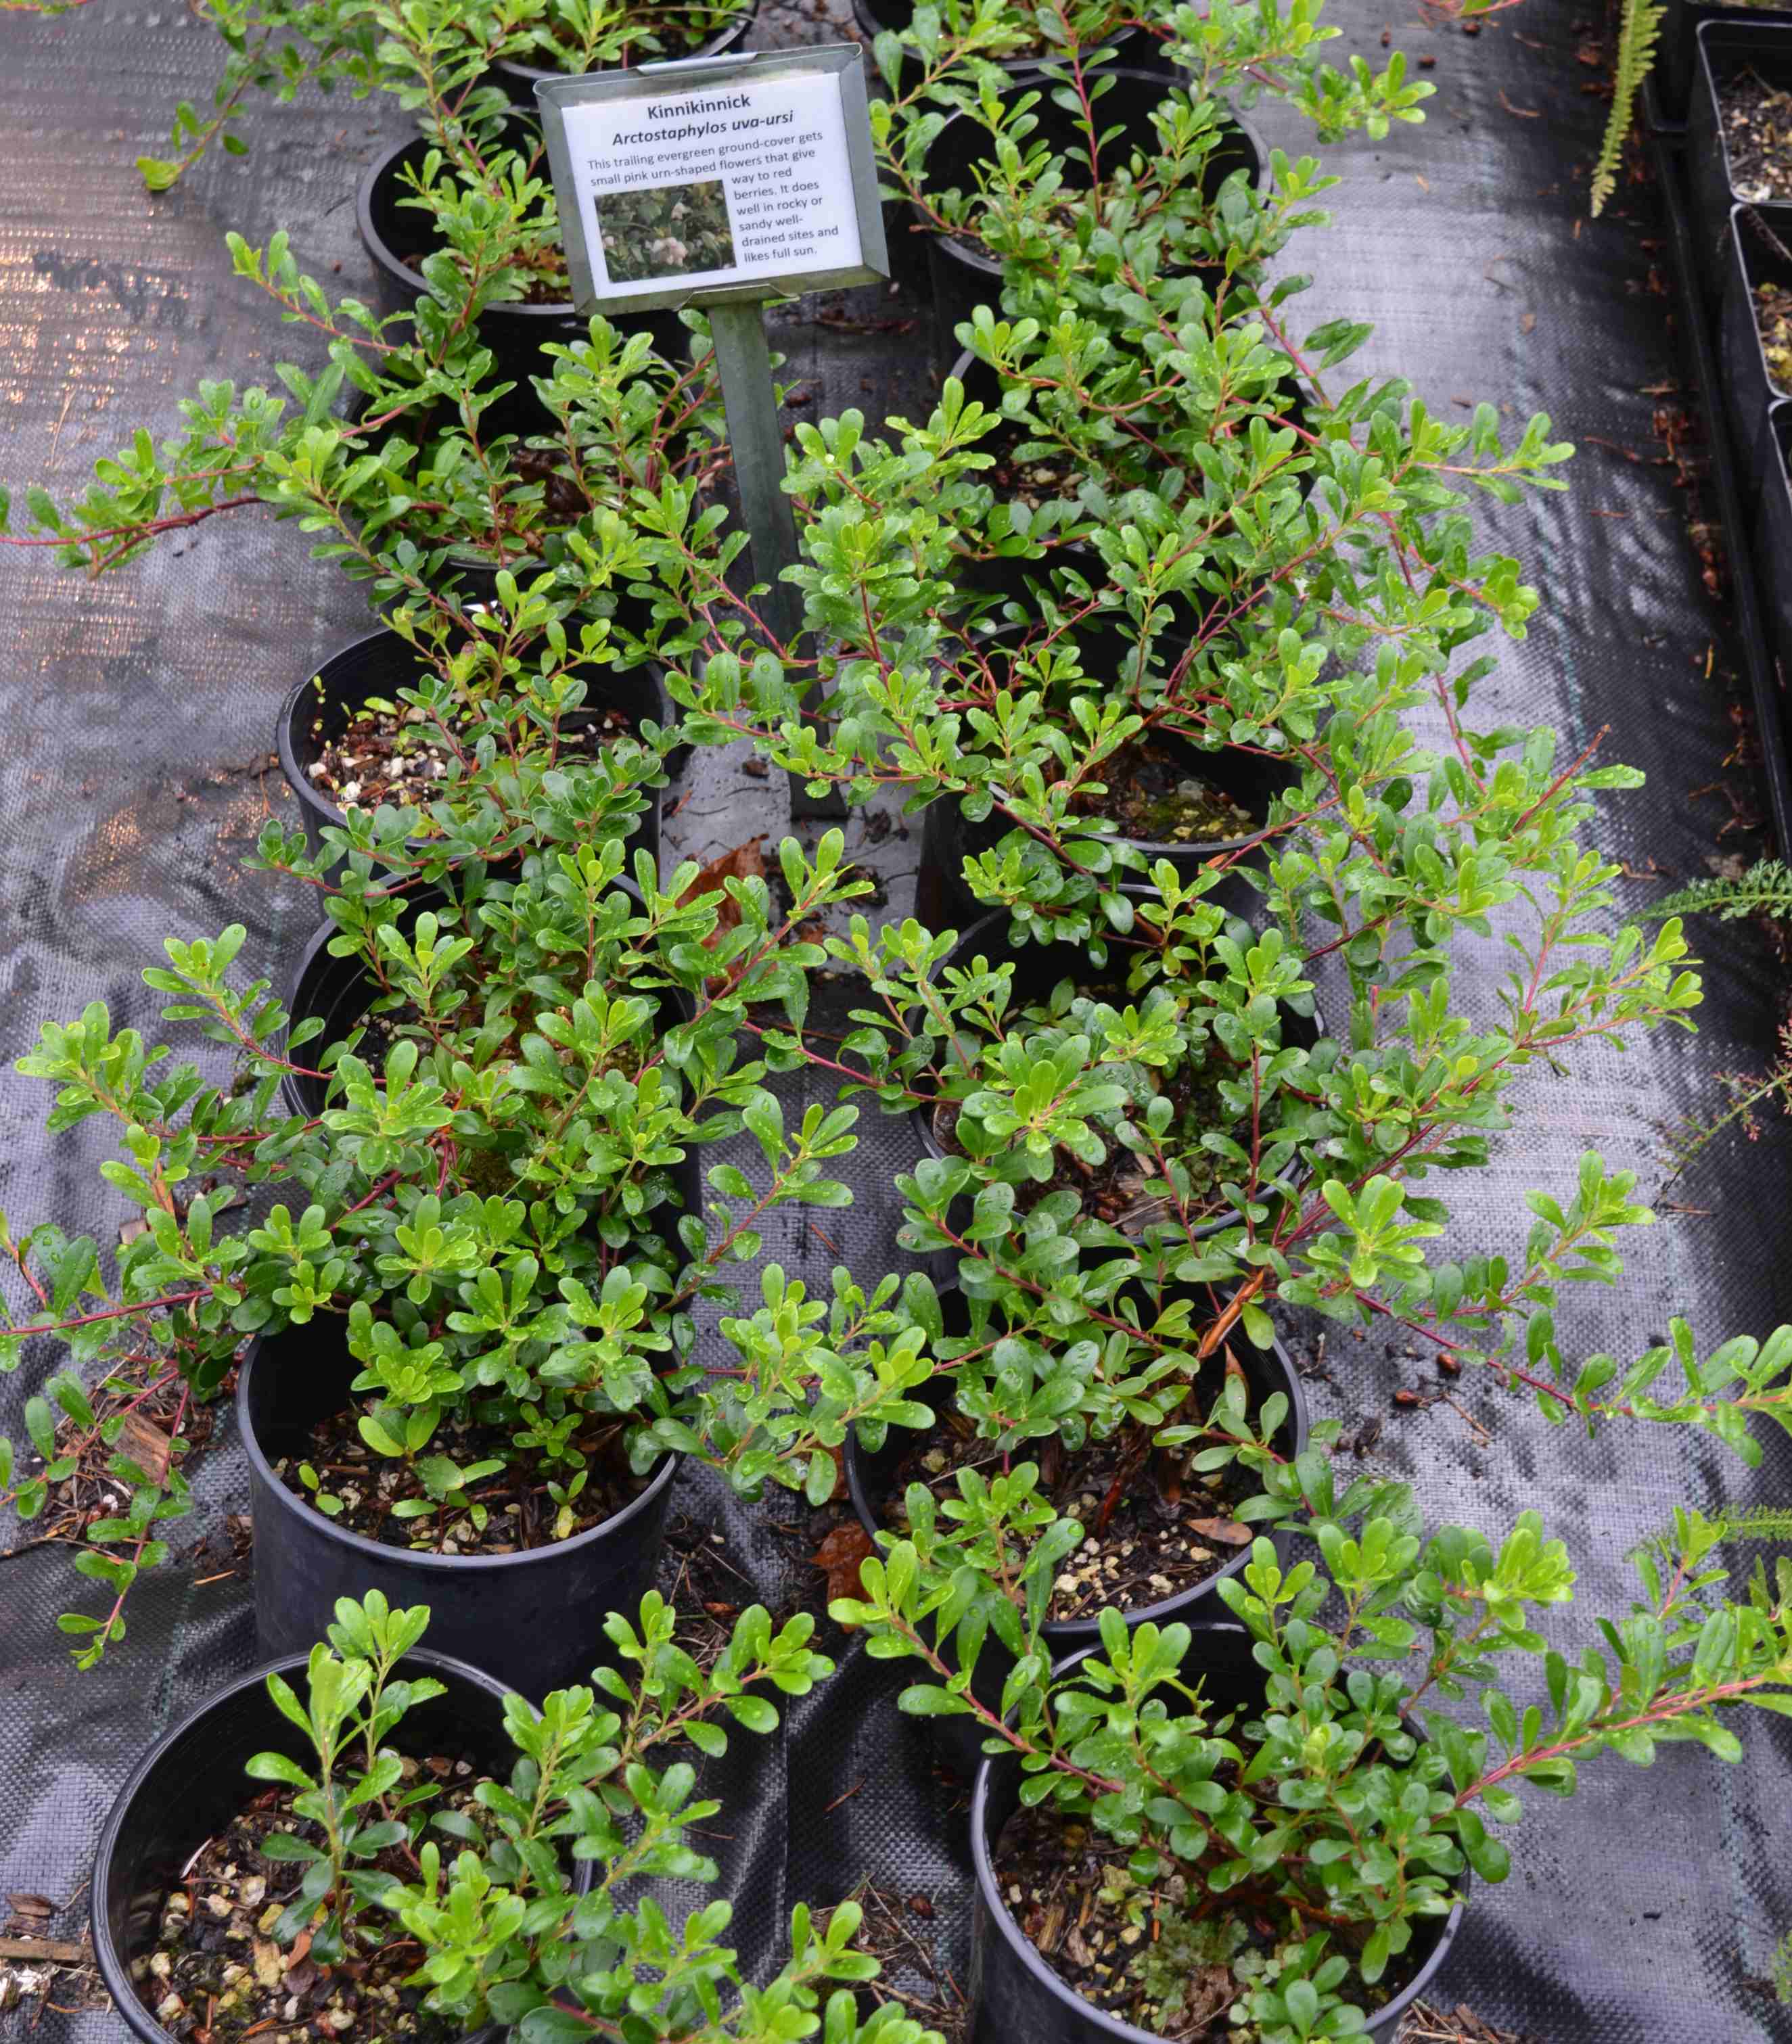 Arctostaphylos uva-ursi grown in 1-gallon containers at a native plant nursery.